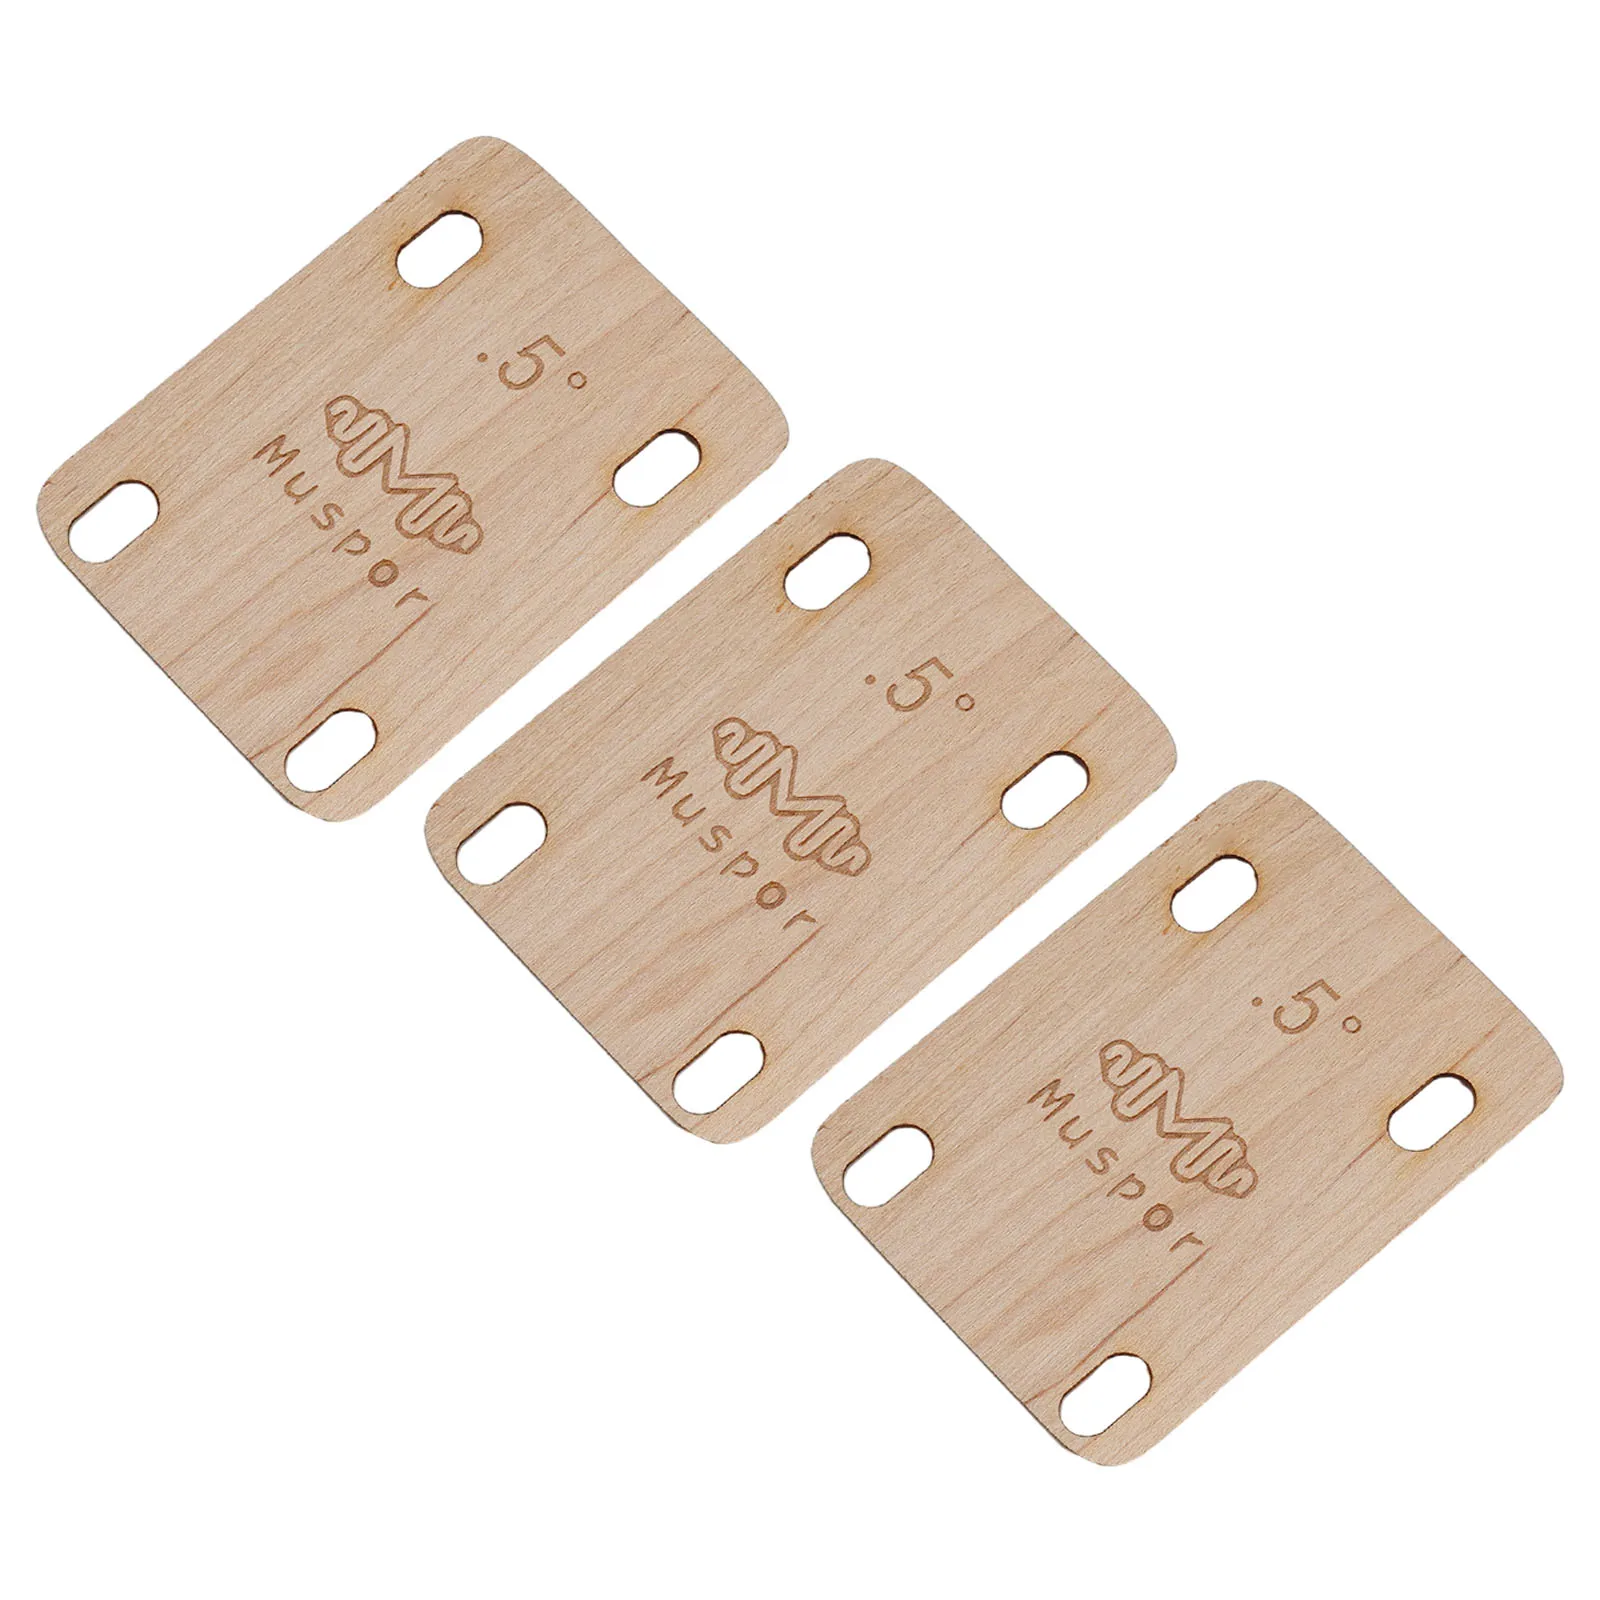 Replacement Parts Neck Shims Neck Shims Neck Shims 0.5 Degree Electric Guitar Maple Plate Brand New High Quality